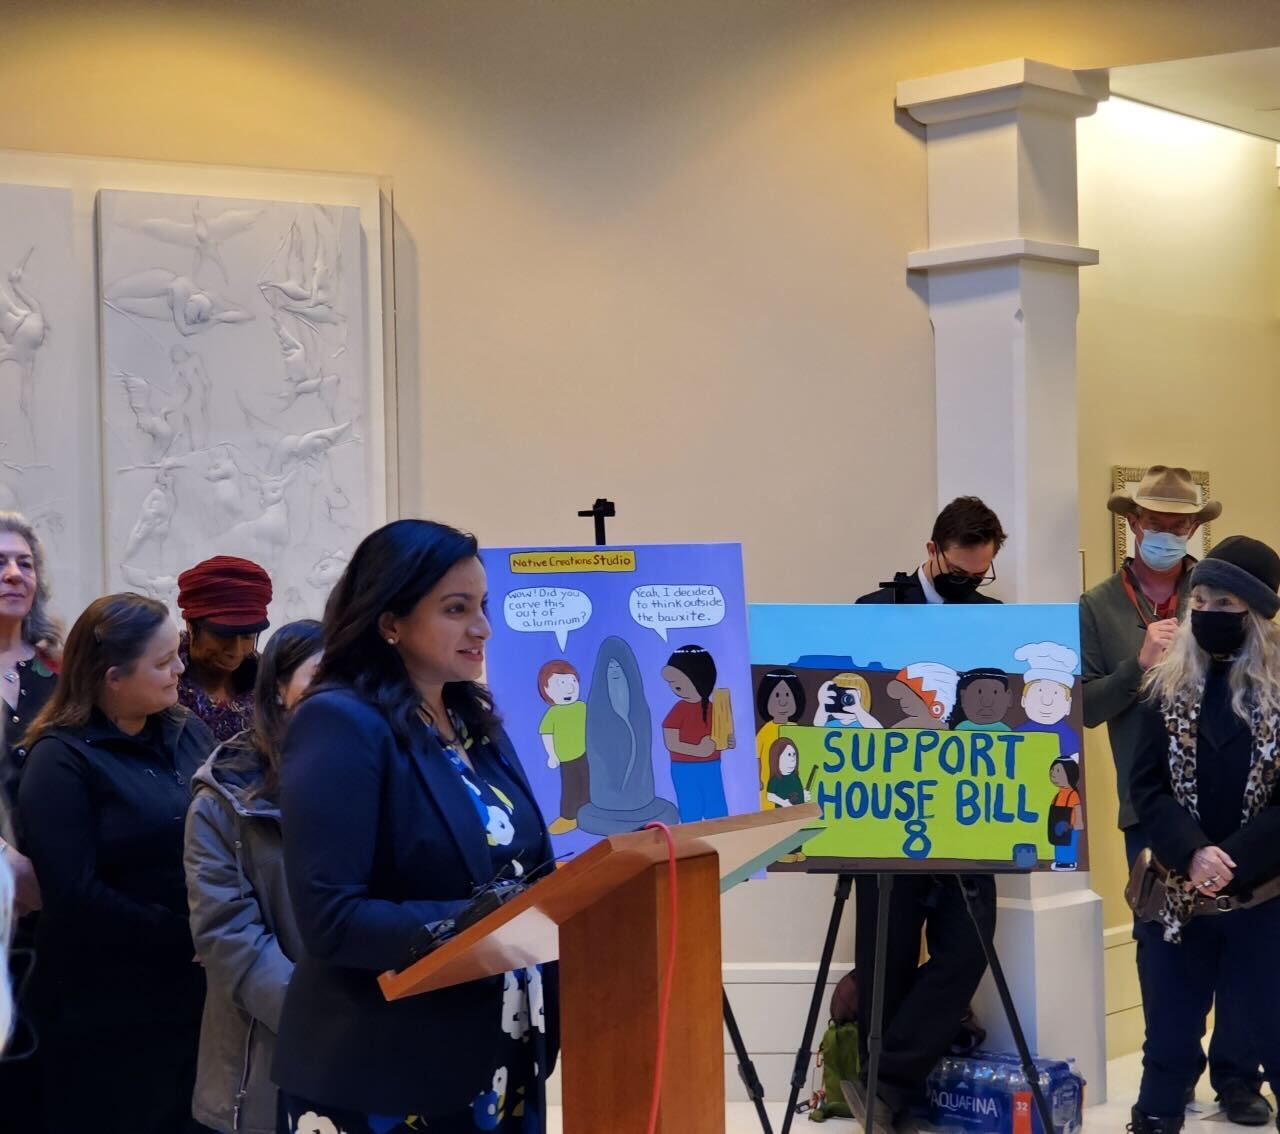 A New Mexico state legislator stands at a podium in the atrium of the state capitol. Around her are supporters of NM House Bill 8, which would support the arts in New Mexico.